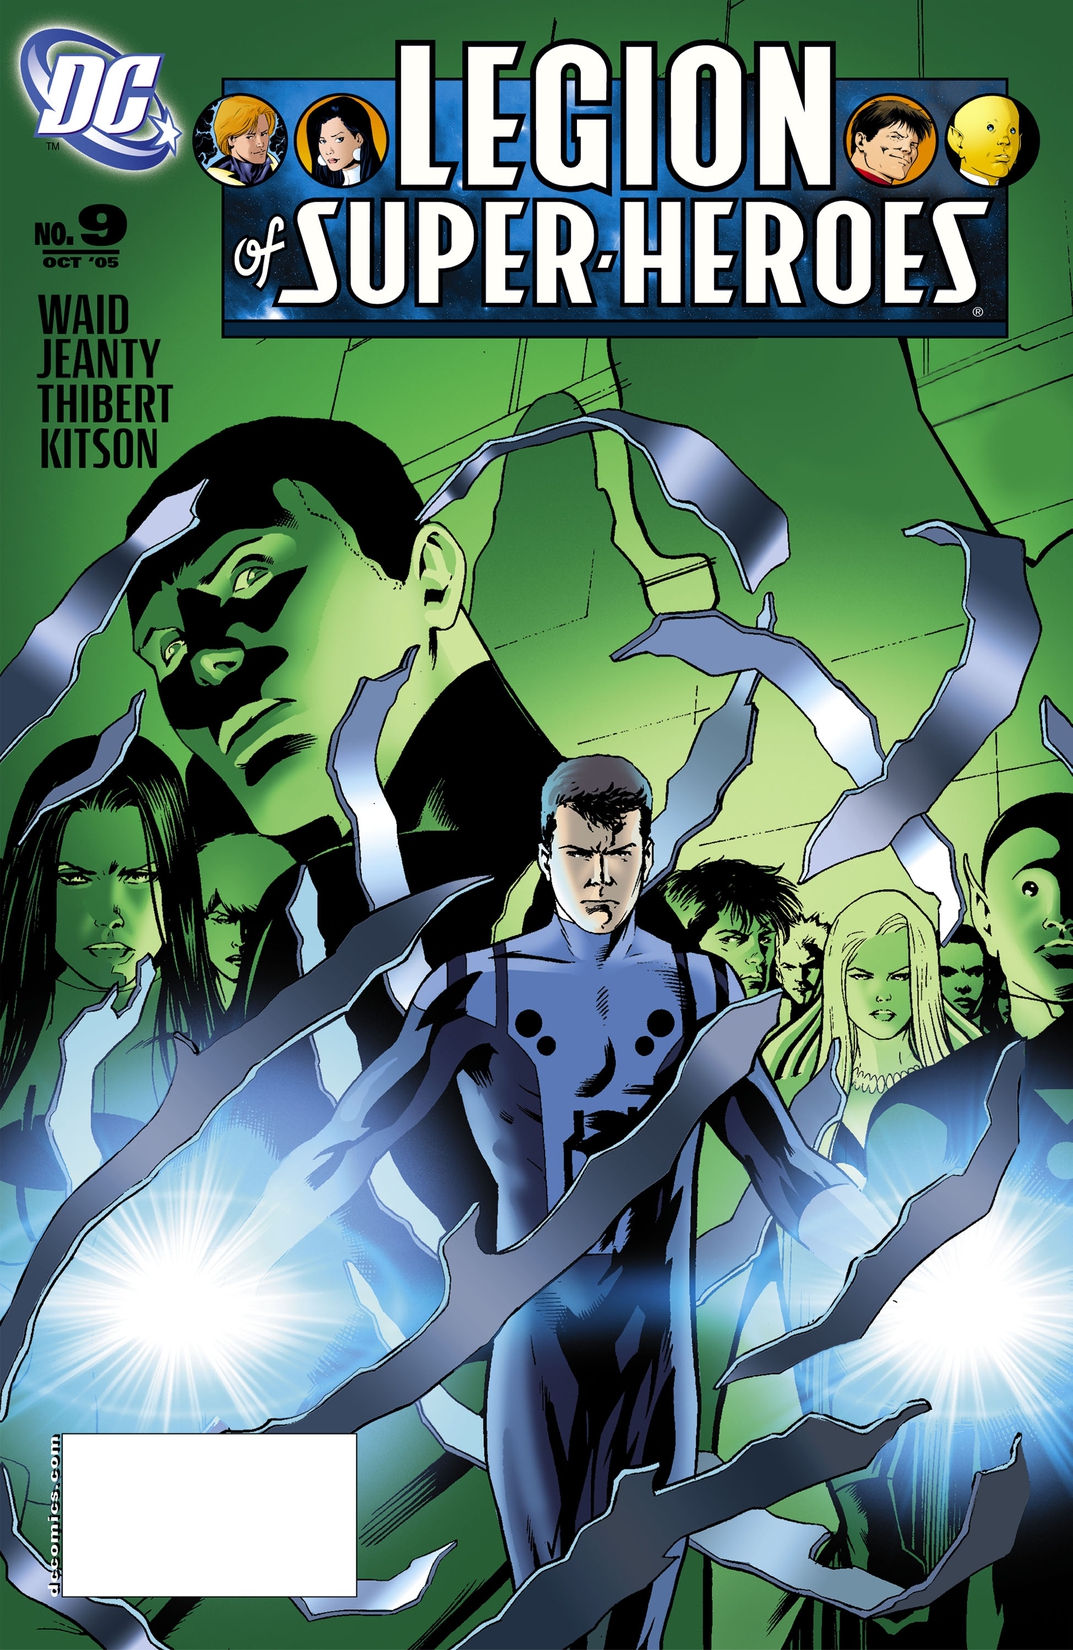 Legion of Super Heroes (2004-) #9 preview images